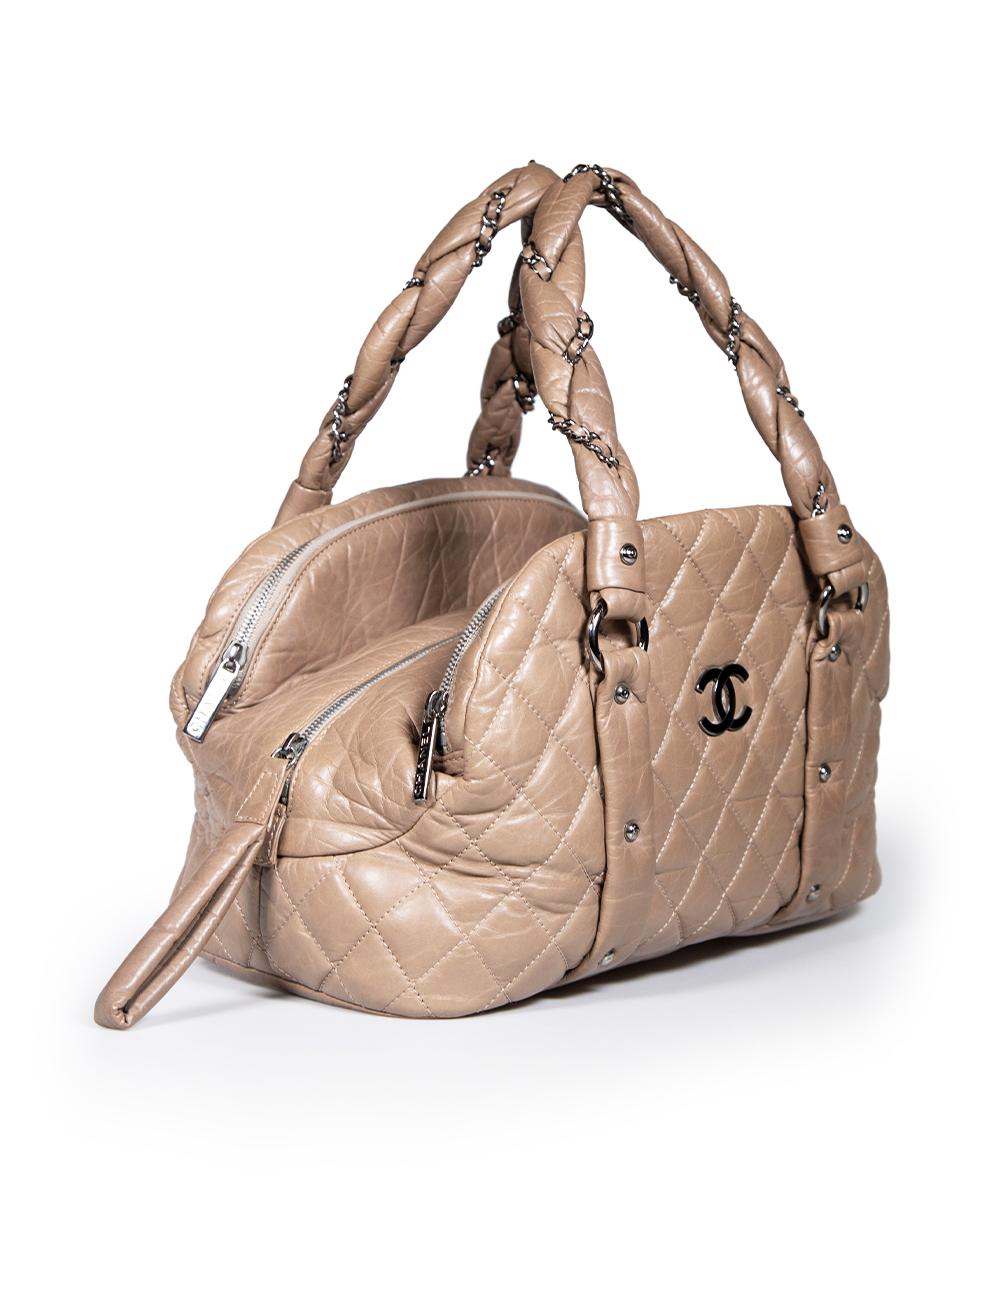 CONDITION is Very good. Minimal wear to bag is evident. Minimal wear to internal lining of all three compartments, with discolouration around the zips and minor marks to the base and sides of the cloth on this used Chanel designer resale item.
 
 
